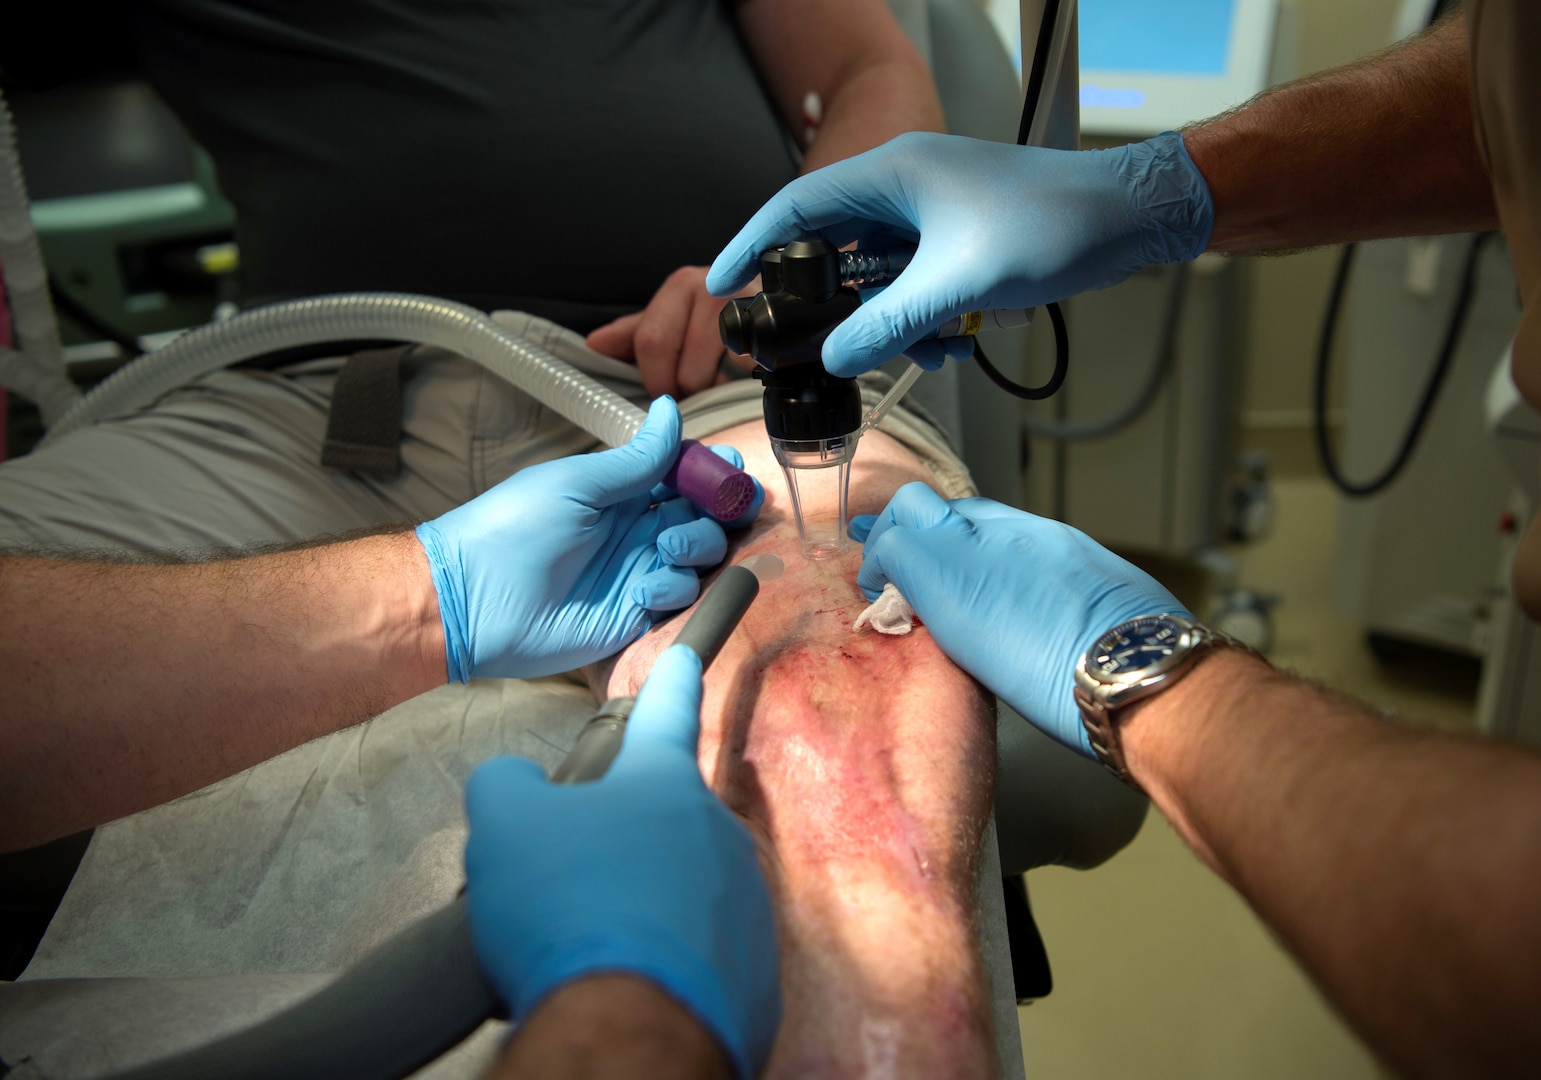 Retired Army Staff Sgt. Daniel Burgess, a wounded warrior, receives a carbon dioxide laser treatment at the MacDill Air Force Base, Florida, scar clinic Feb. 15, 2019. The wounded-warrior-focused clinic offers a variety of unique treatments for those who suffer from scarring as a result of blast injuries, burns, amputations, and other surgeries.